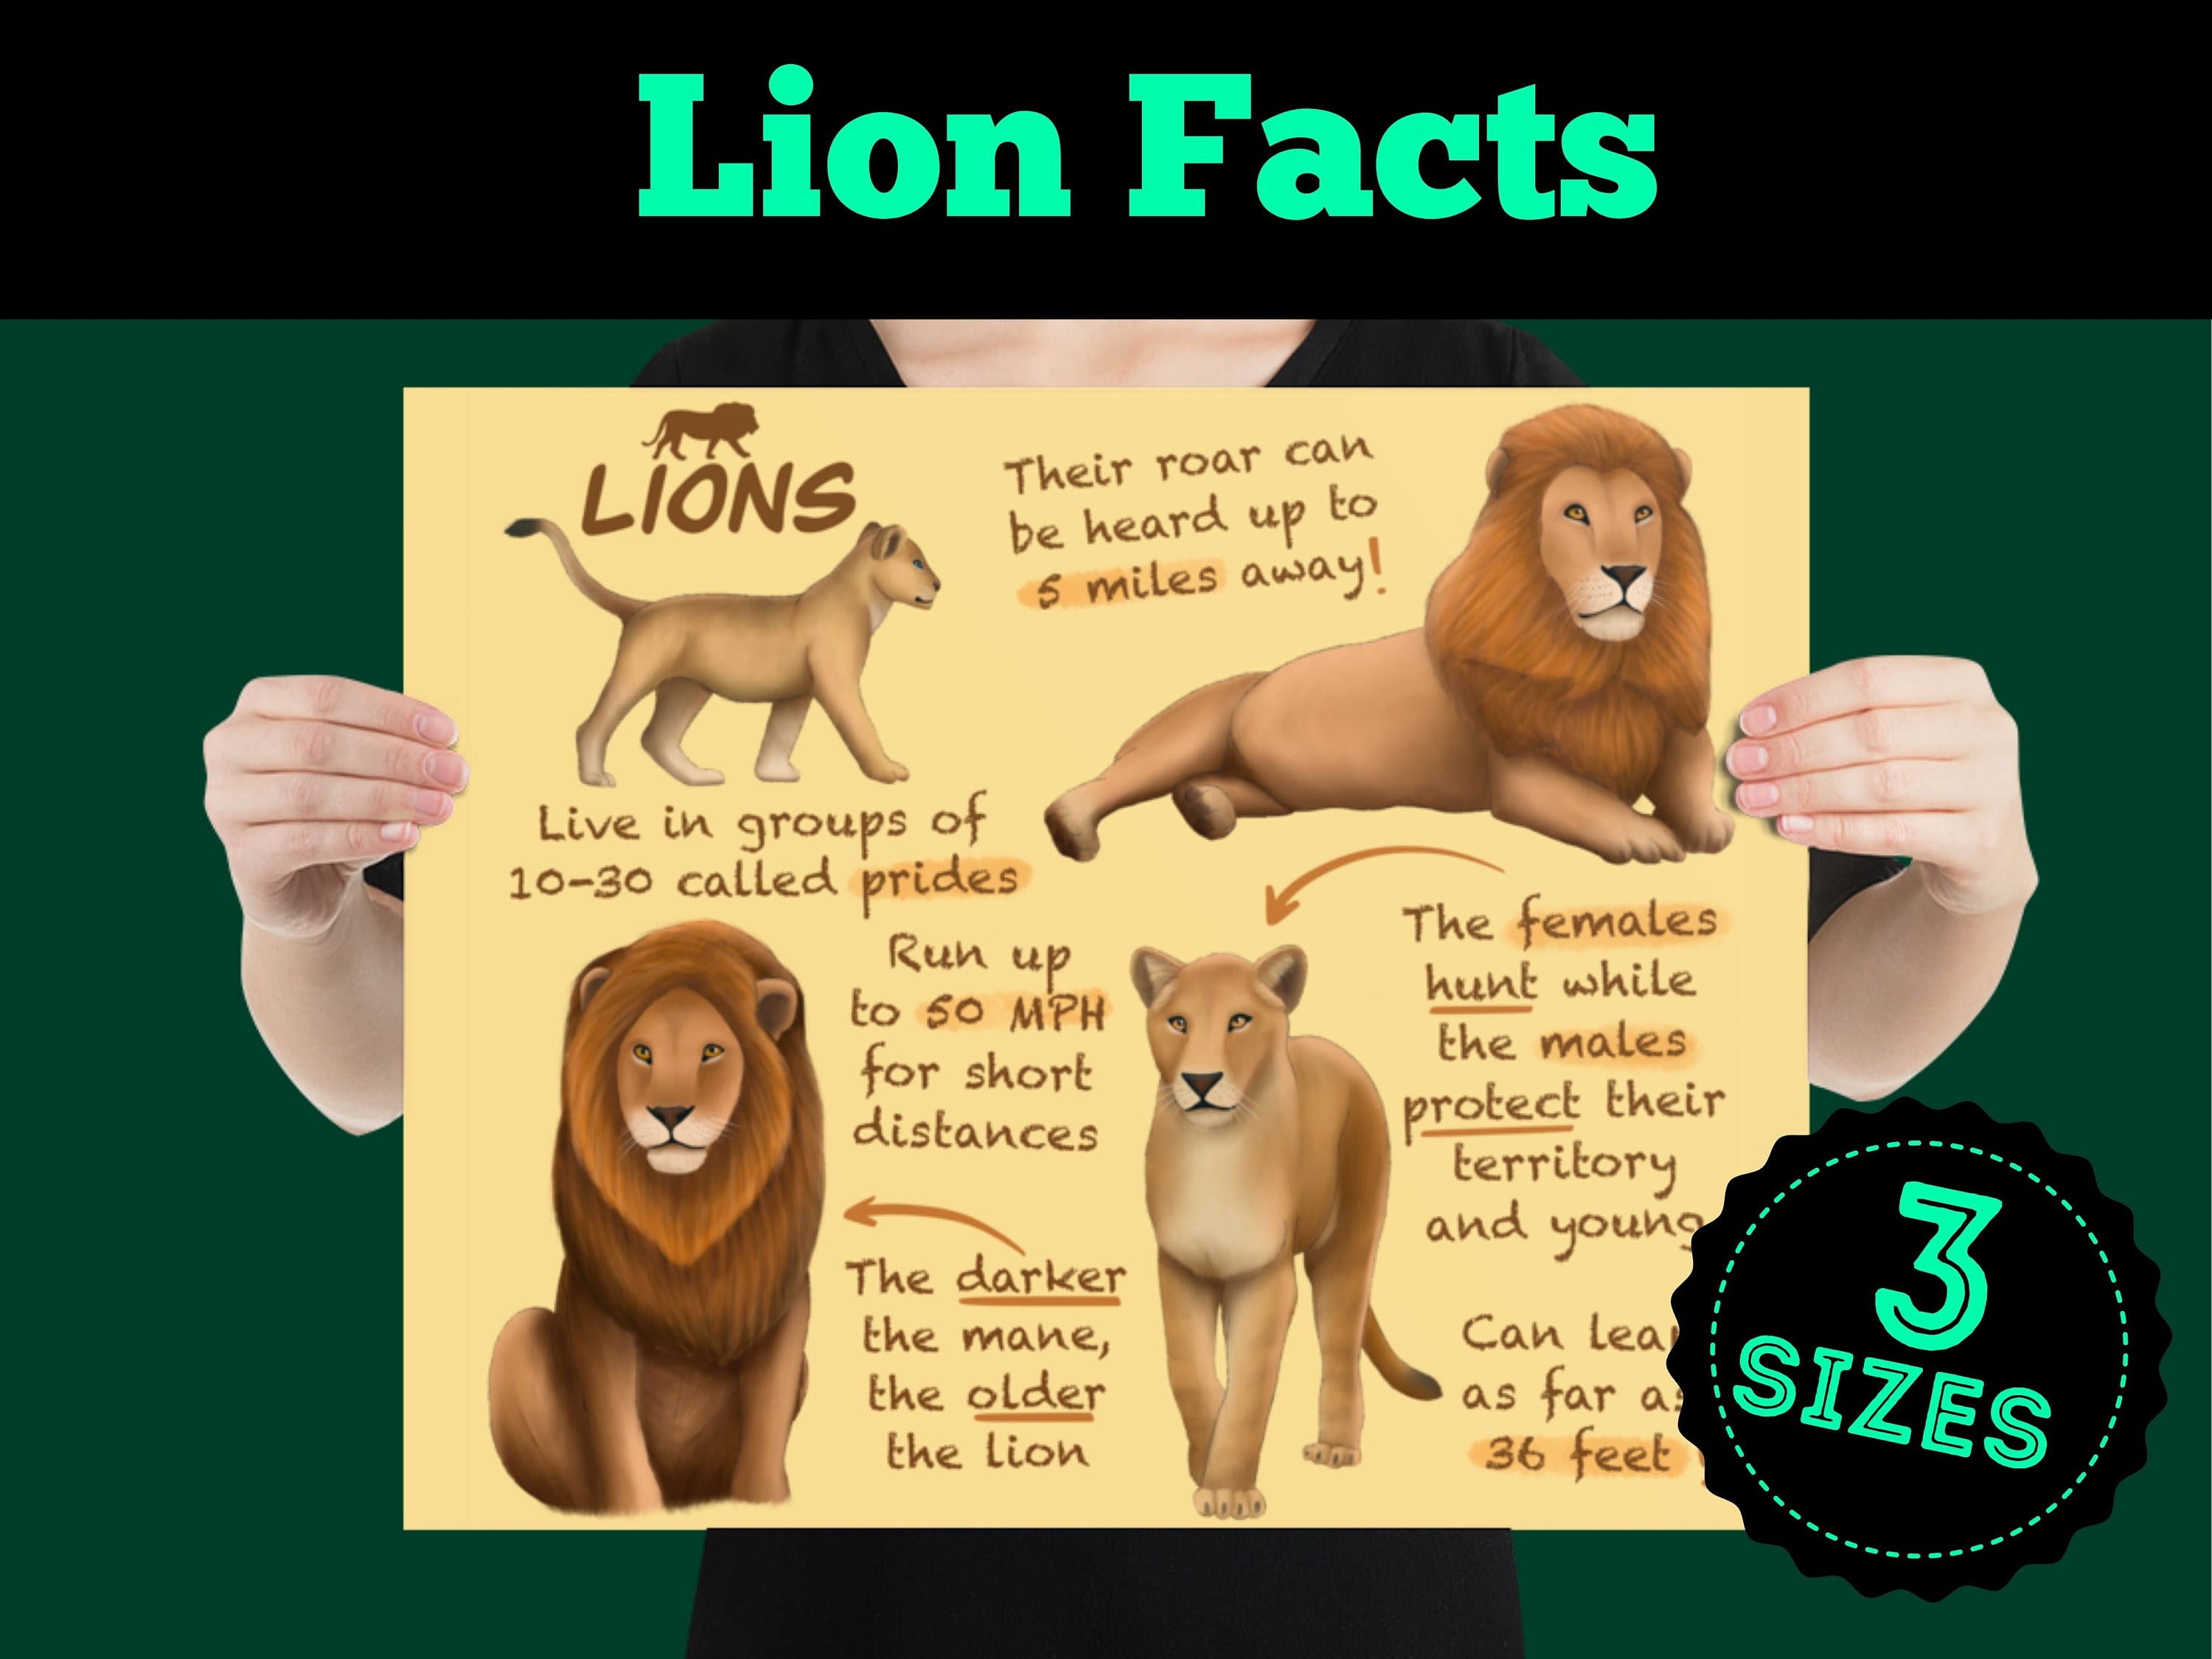 Animal Fun Facts For Kids Lions - Image to u